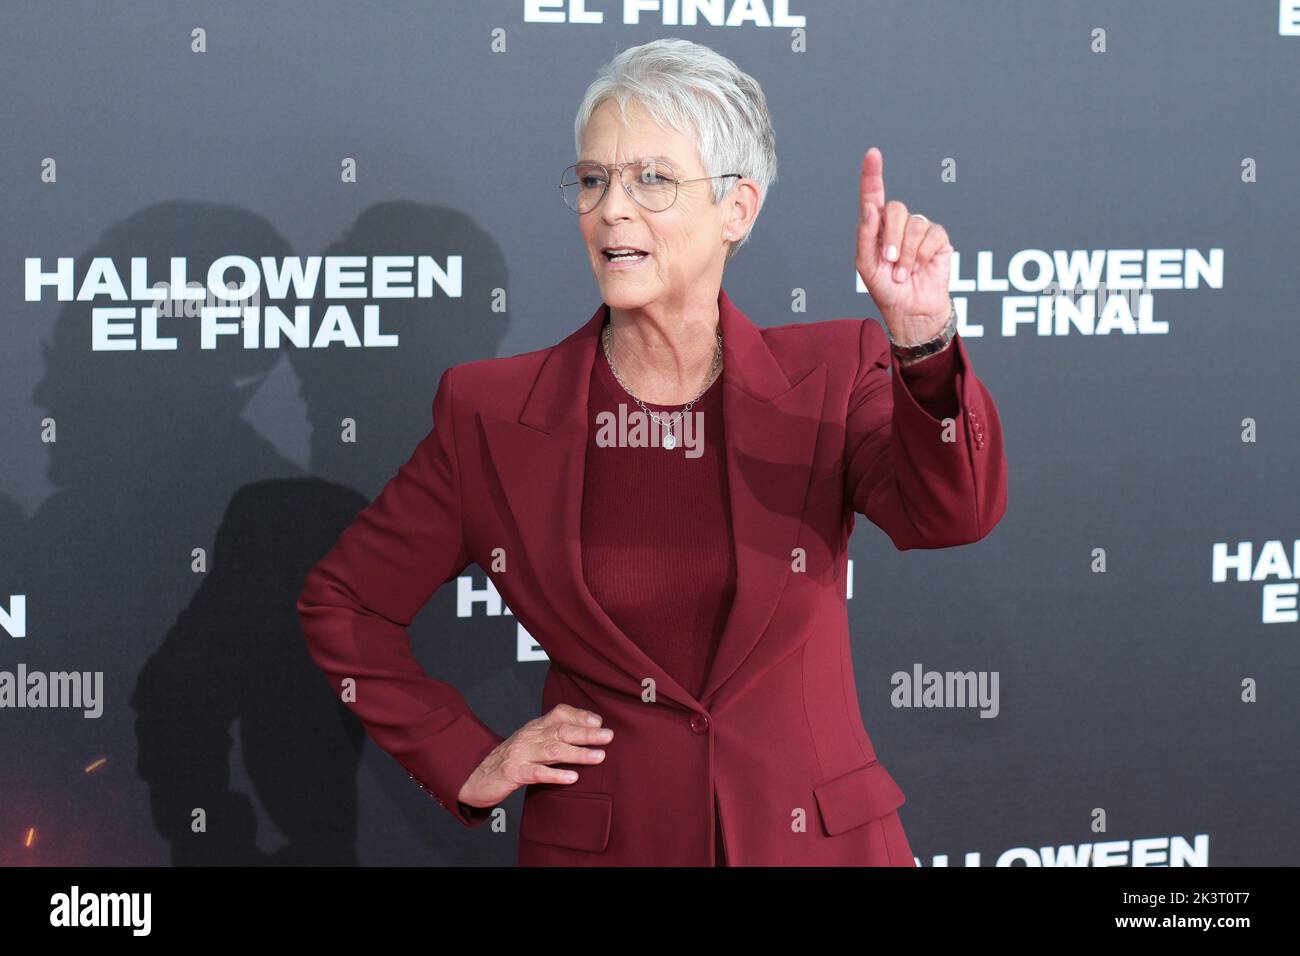 Madrid, Spain. 28th Sep, 2022. American actress, Jamie Lee Curtis attends 'Halloween: El Final' (Halloween Ends) photocall at Villamagna Hotel in Madrid. (Photo by Atilano Garcia/SOPA Images/Sipa USA) Credit: Sipa USA/Alamy Live News Stock Photo